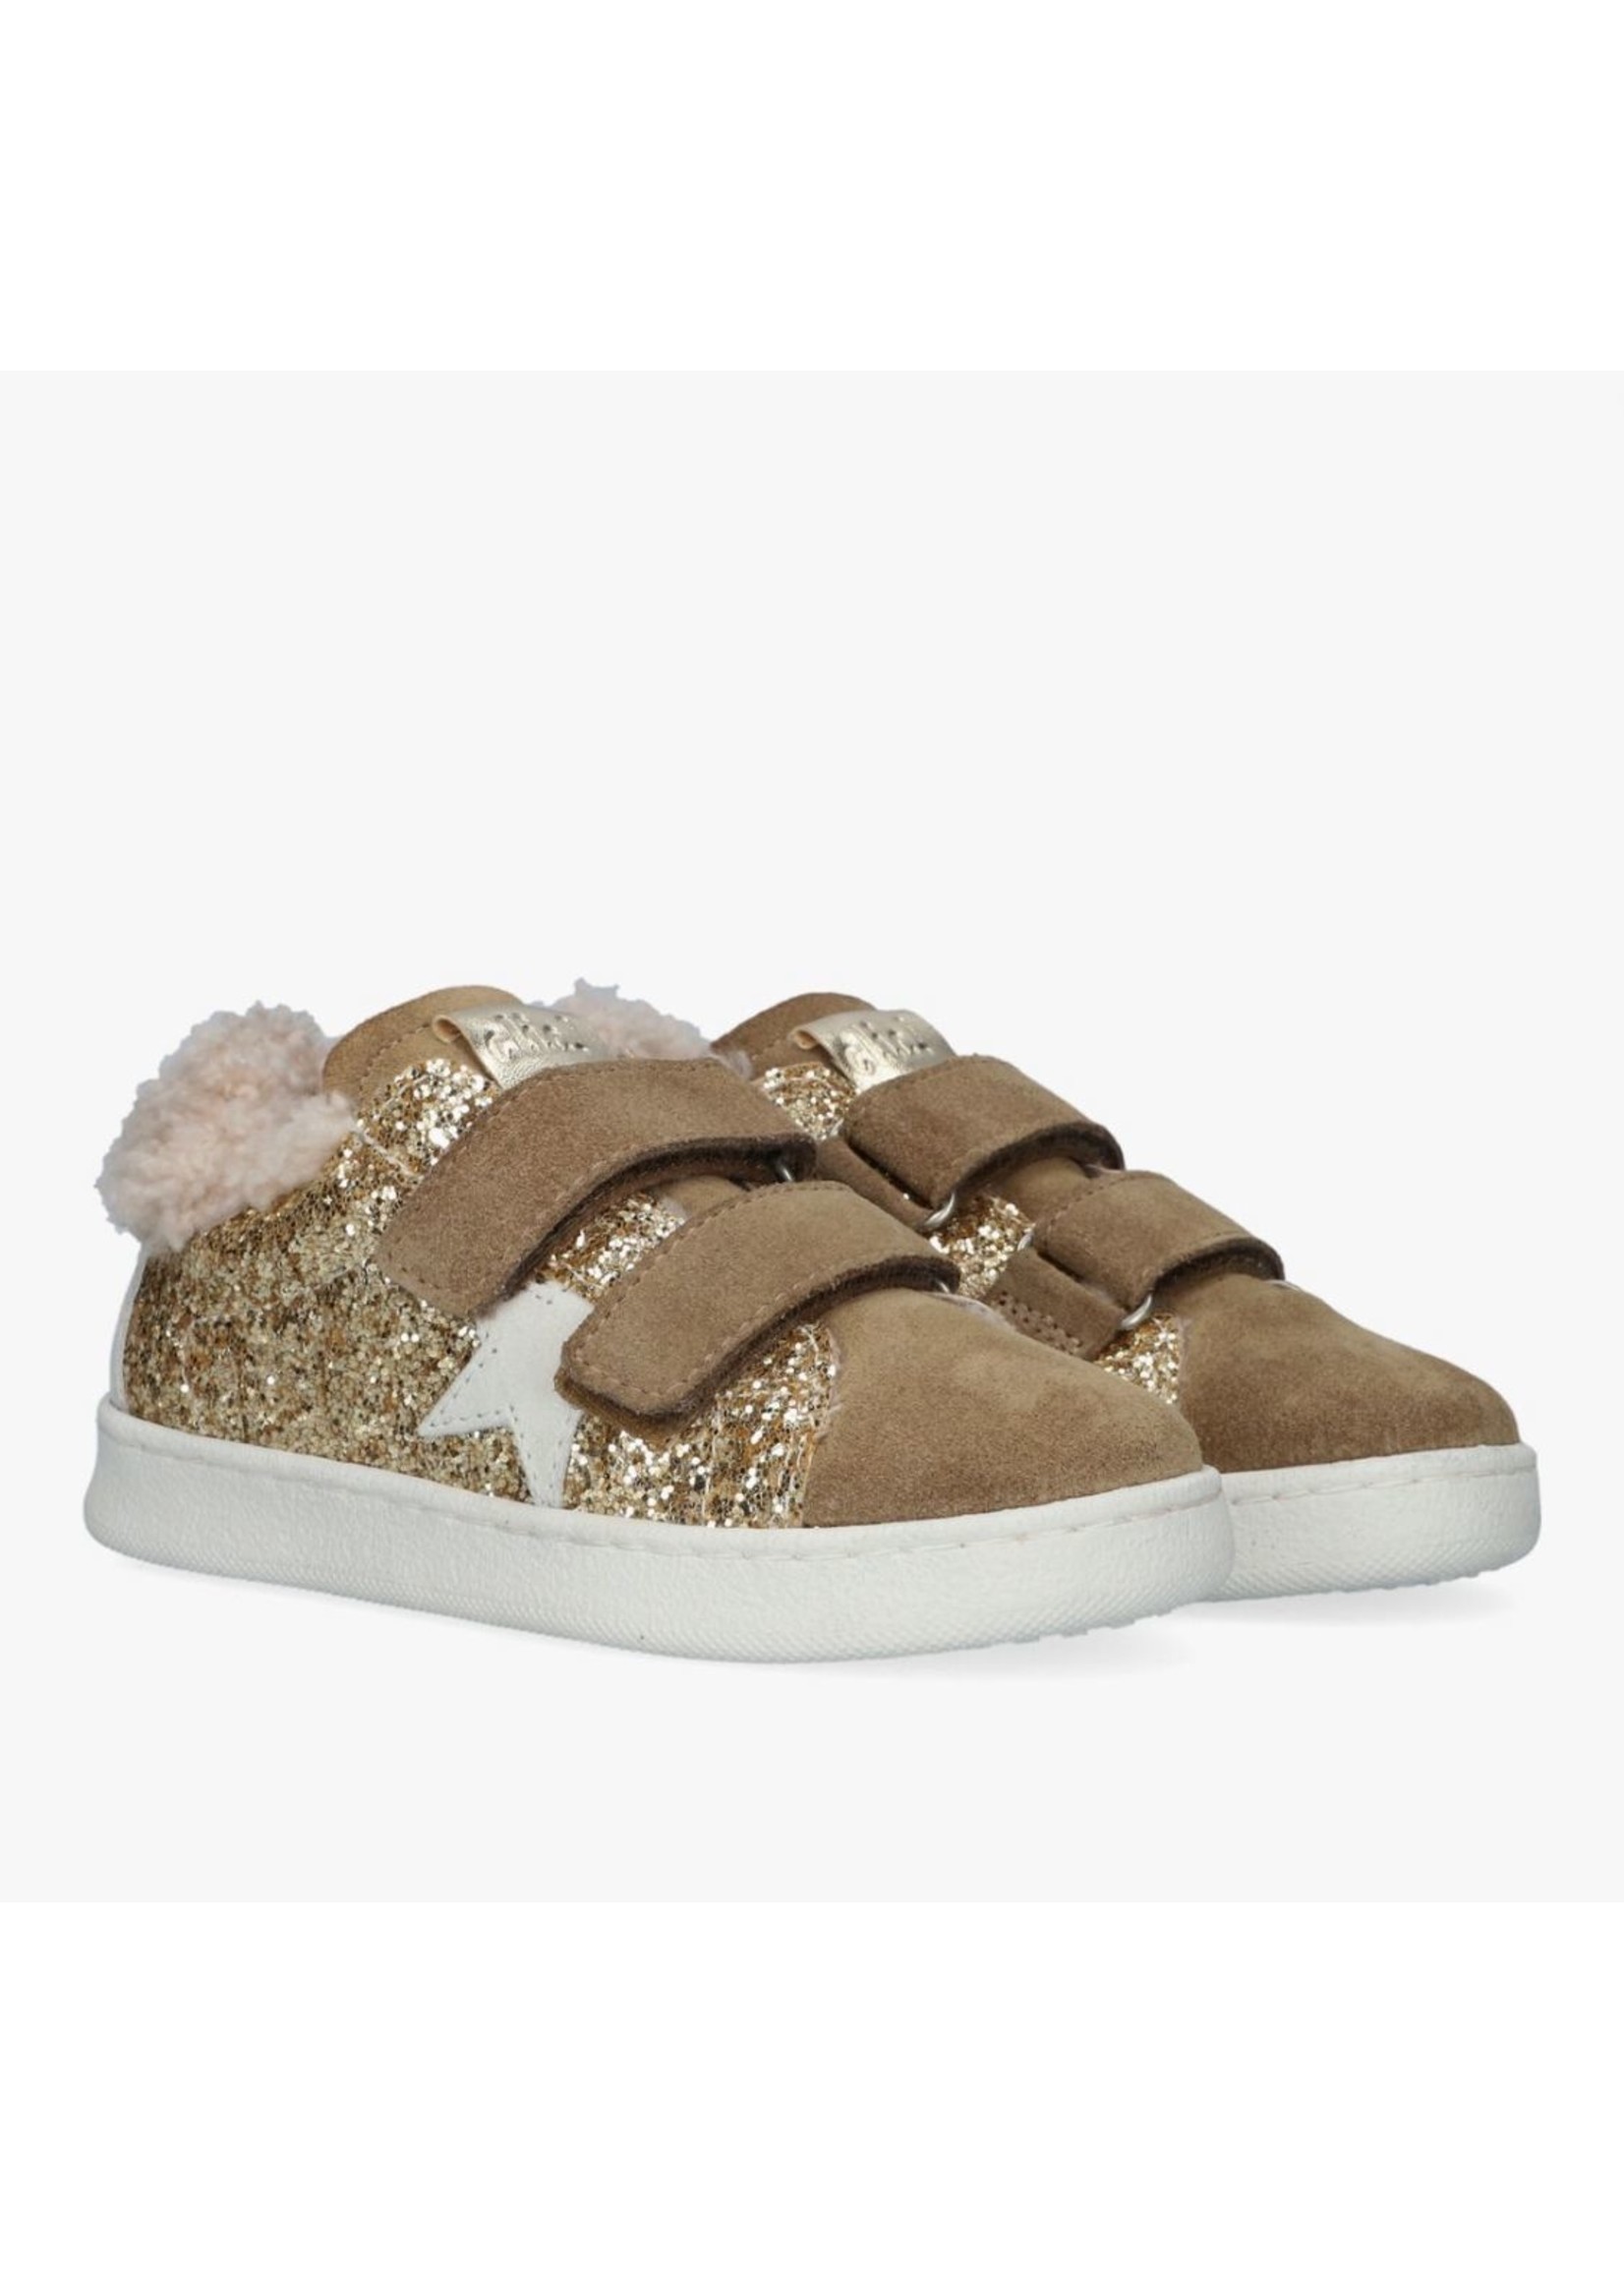 Clic Clic sneakers taupe/goud